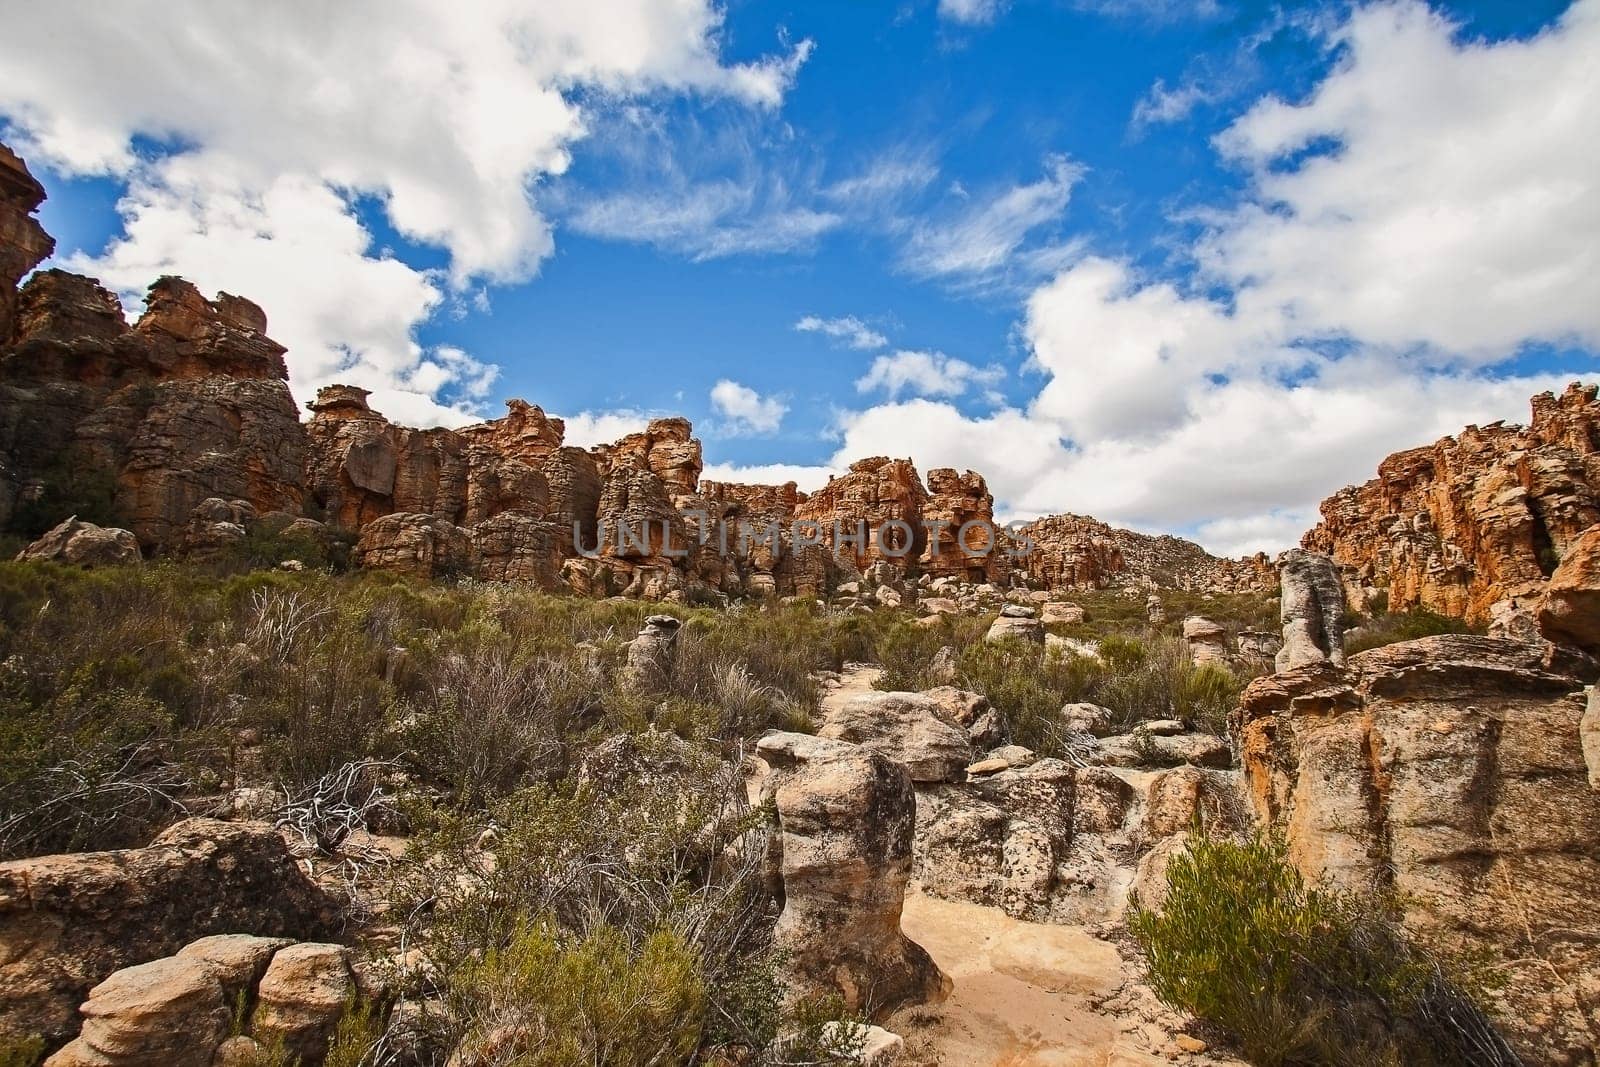 Cederberg Rock Formations 12806 by kobus_peche